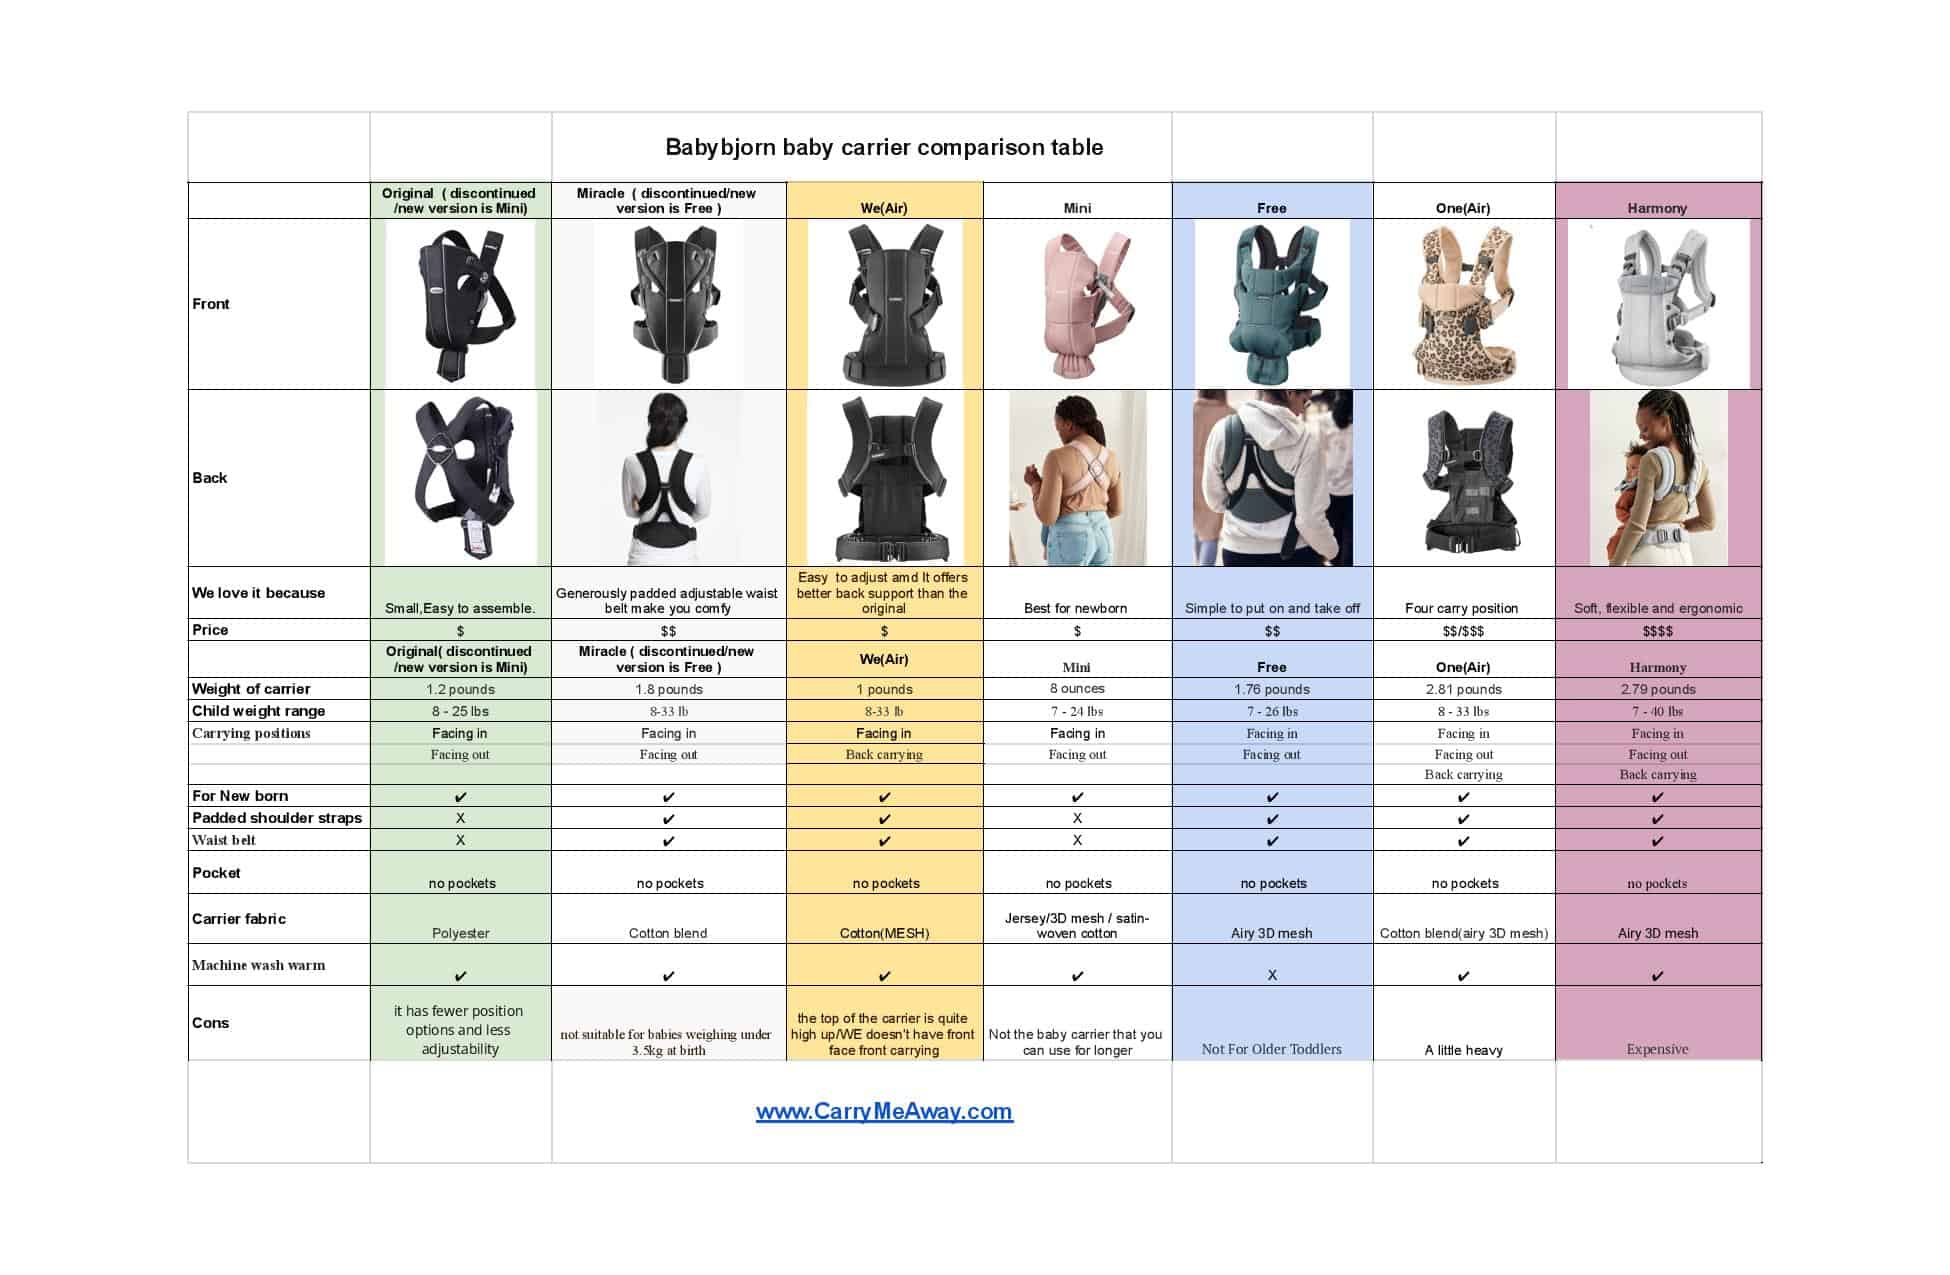 Babybjorn Baby Carrier Comparison Table